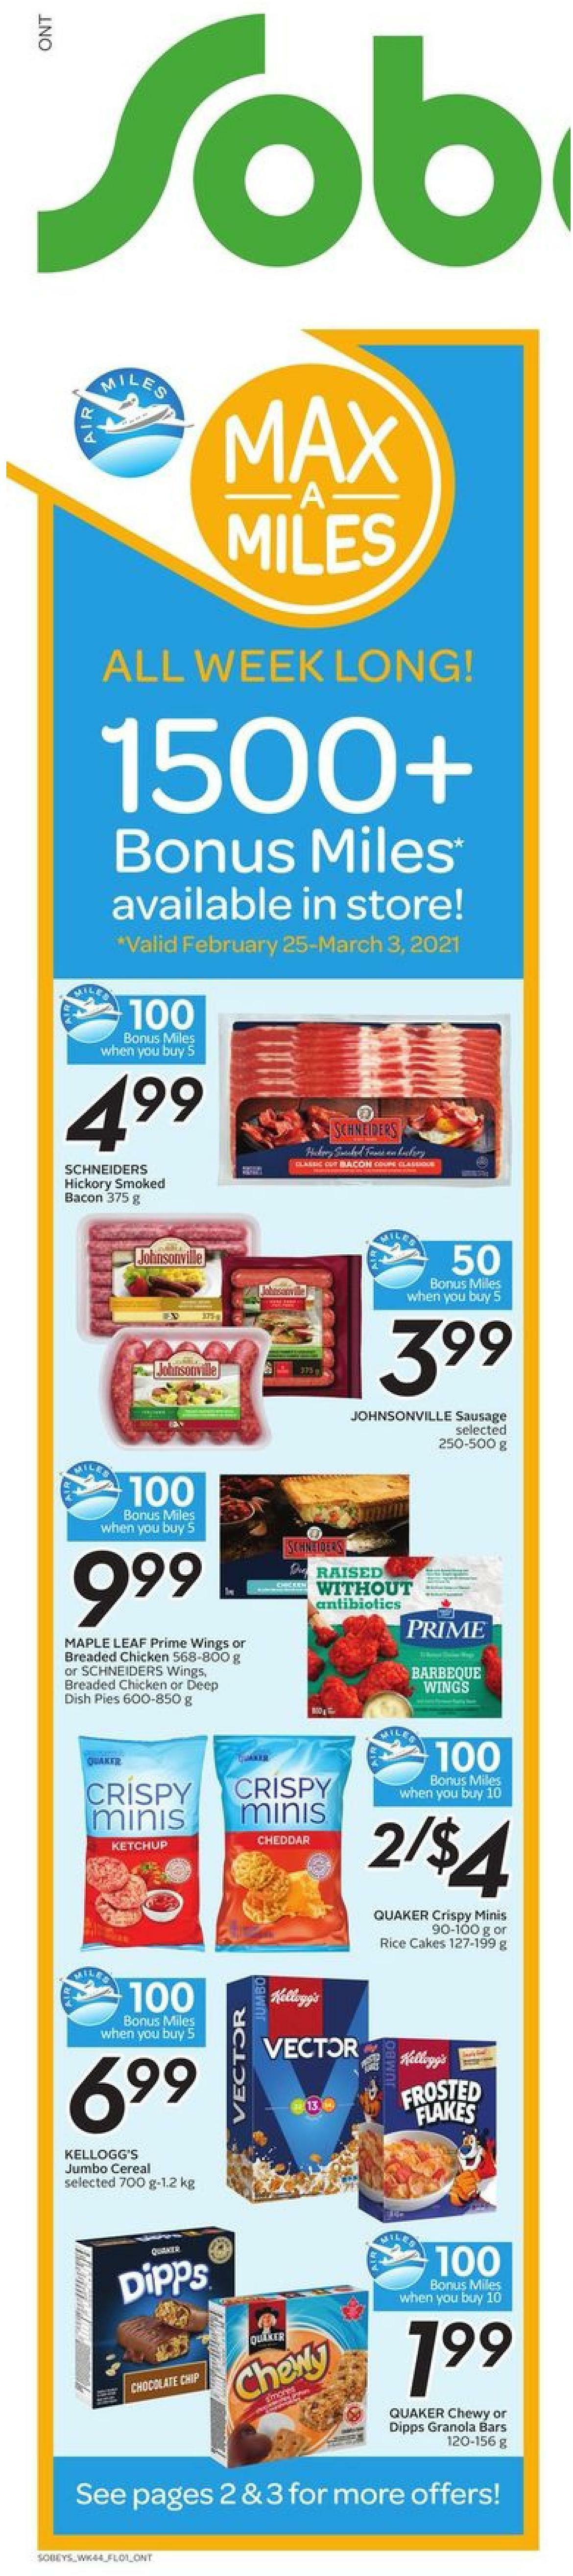 Sobeys Flyer from February 25